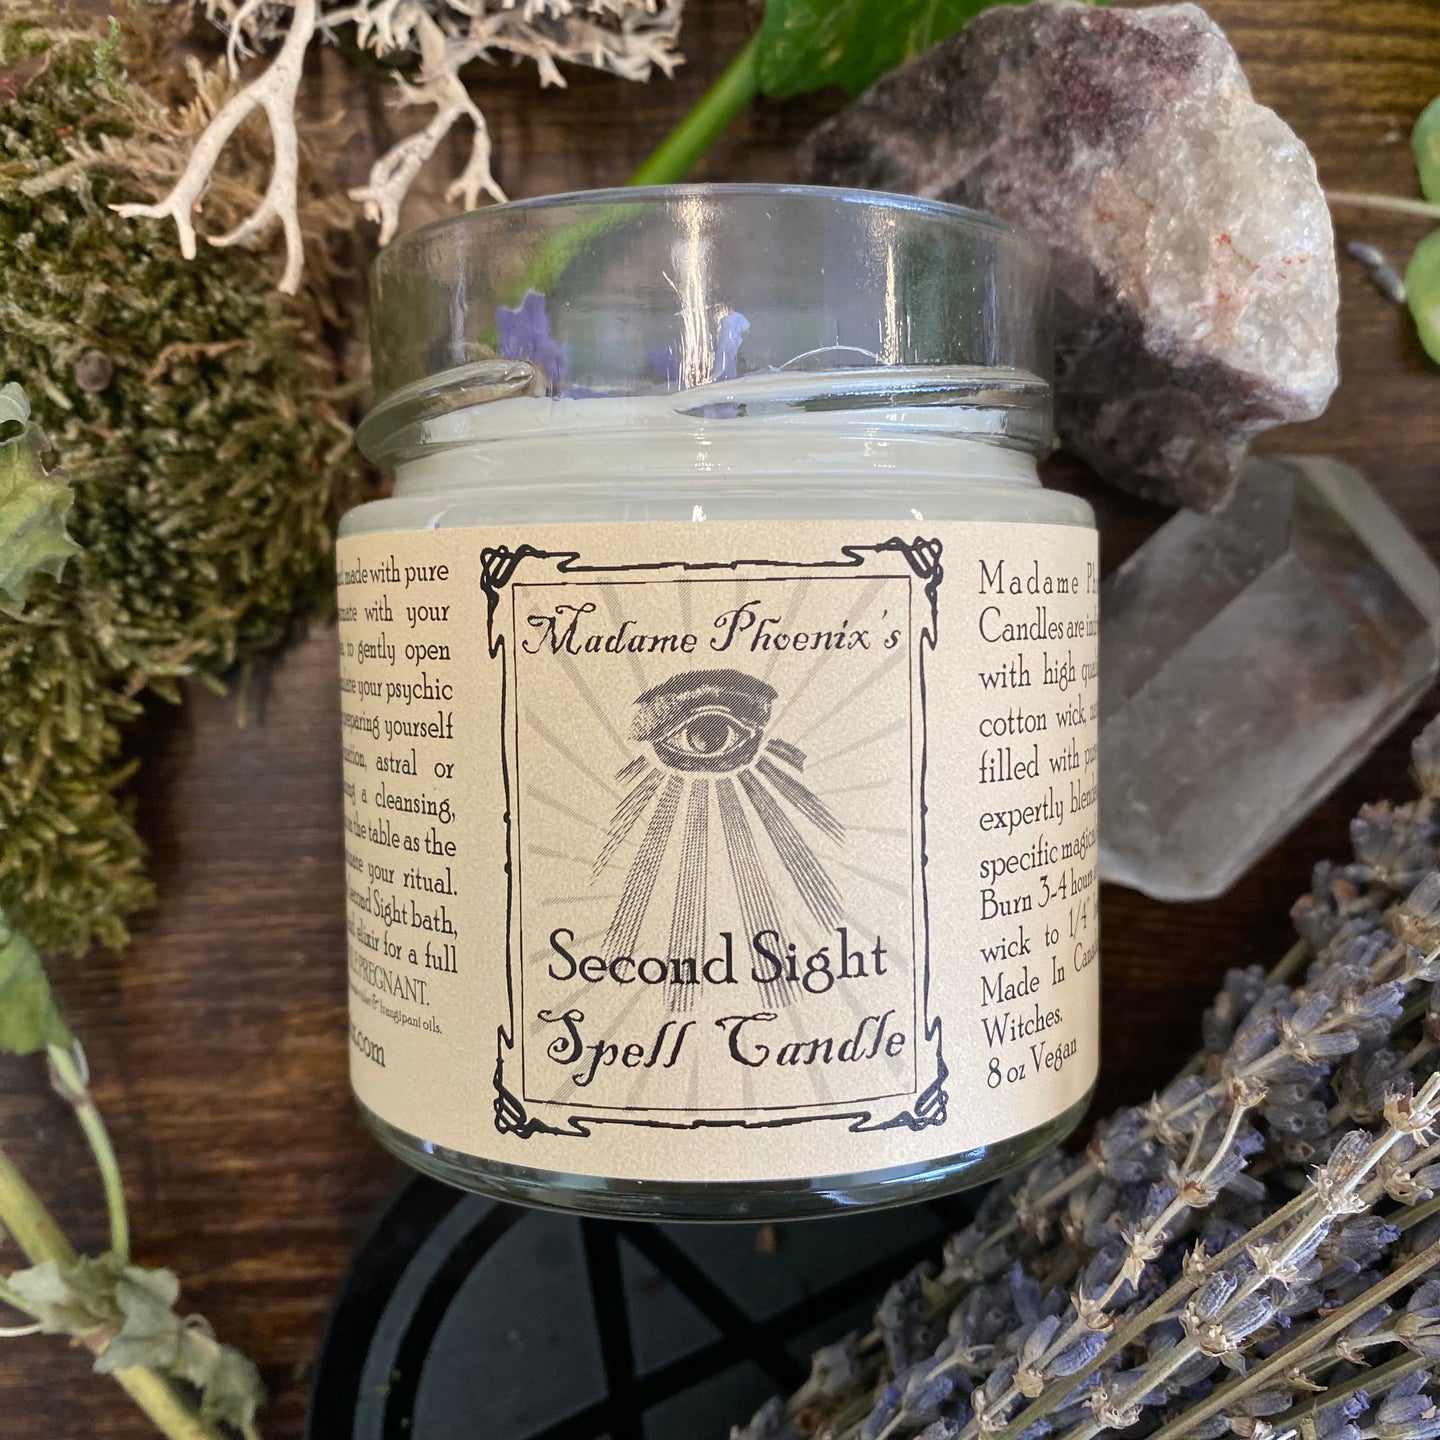 Second Sight Magic Spell Ritual Candle